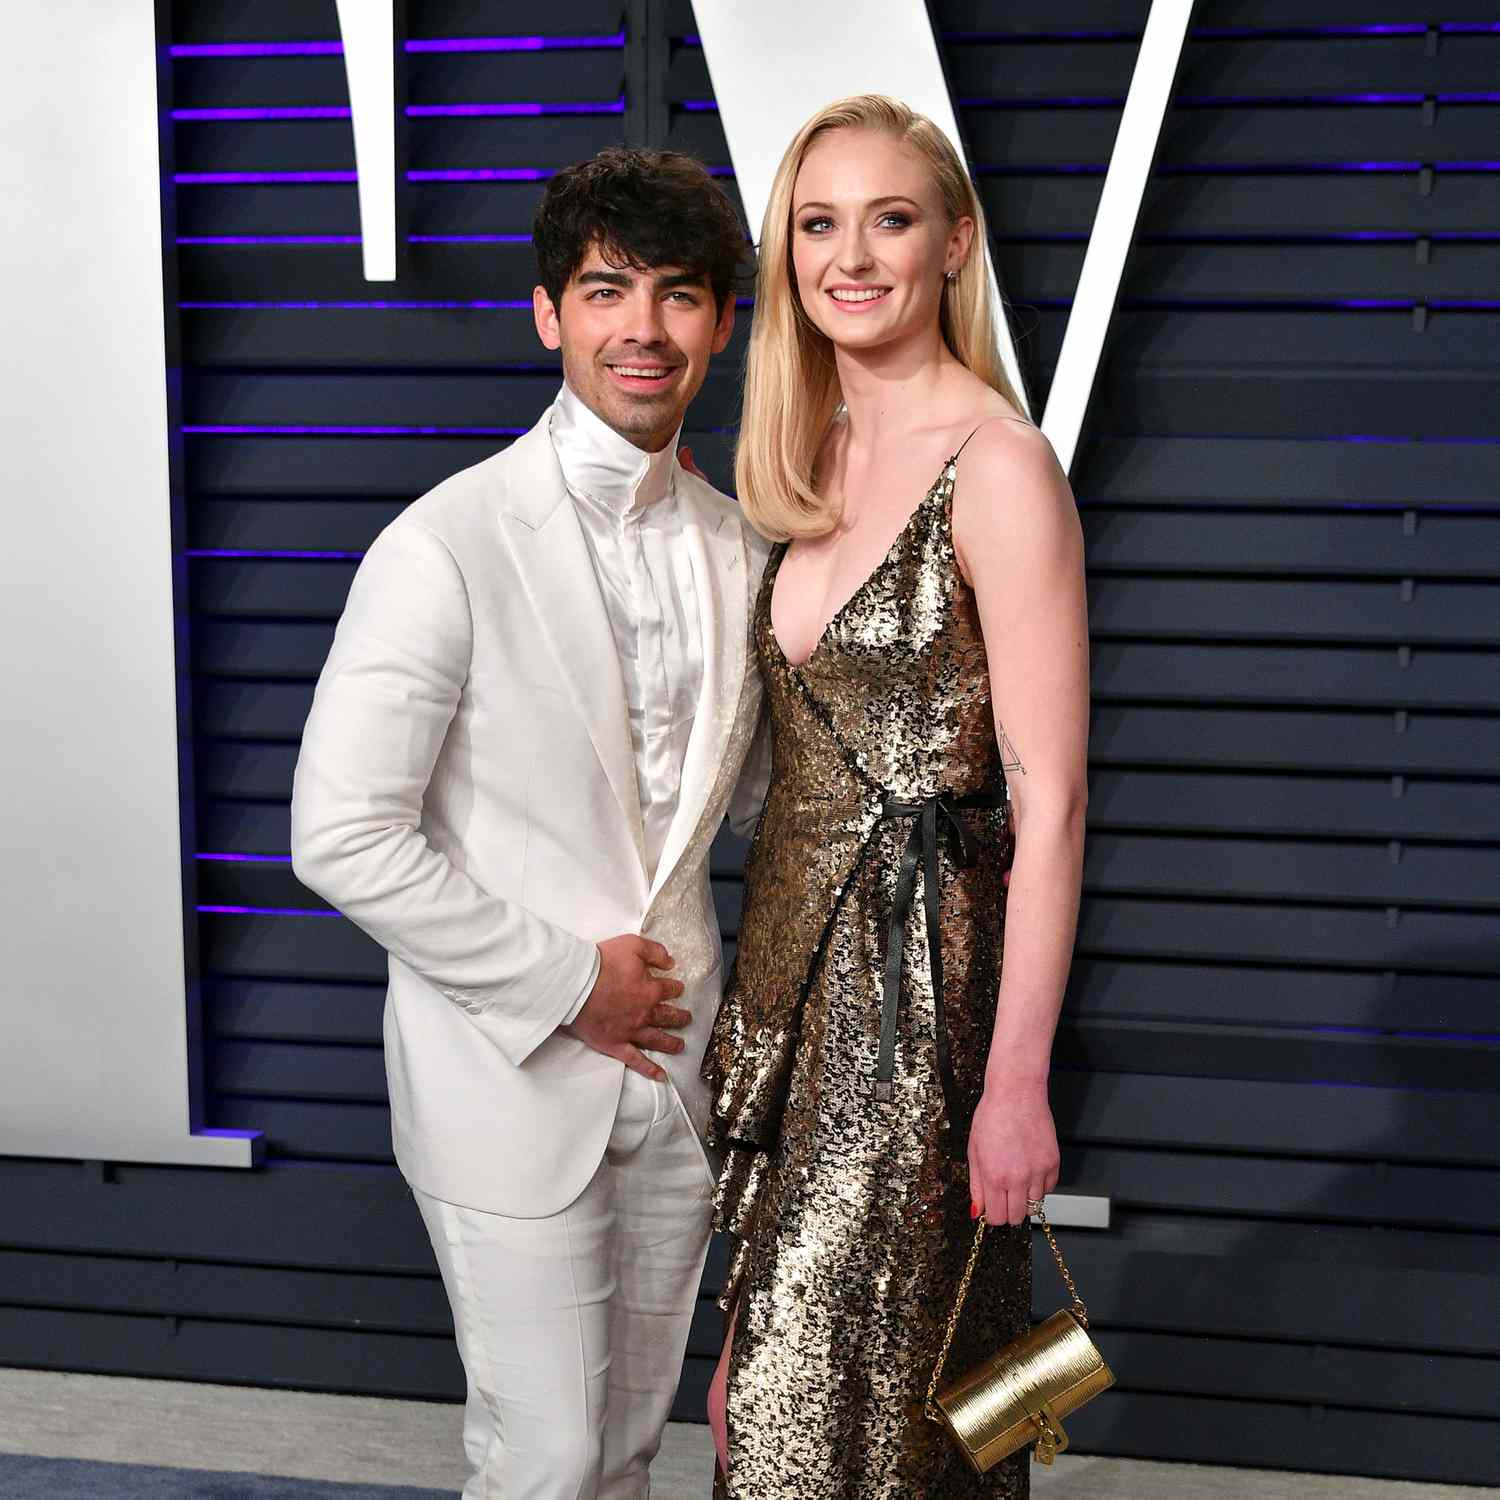 Joe Jonas in a white suit with wife Sophie Turner in a gold dress at Vanity Fair Oscar Party 2019.